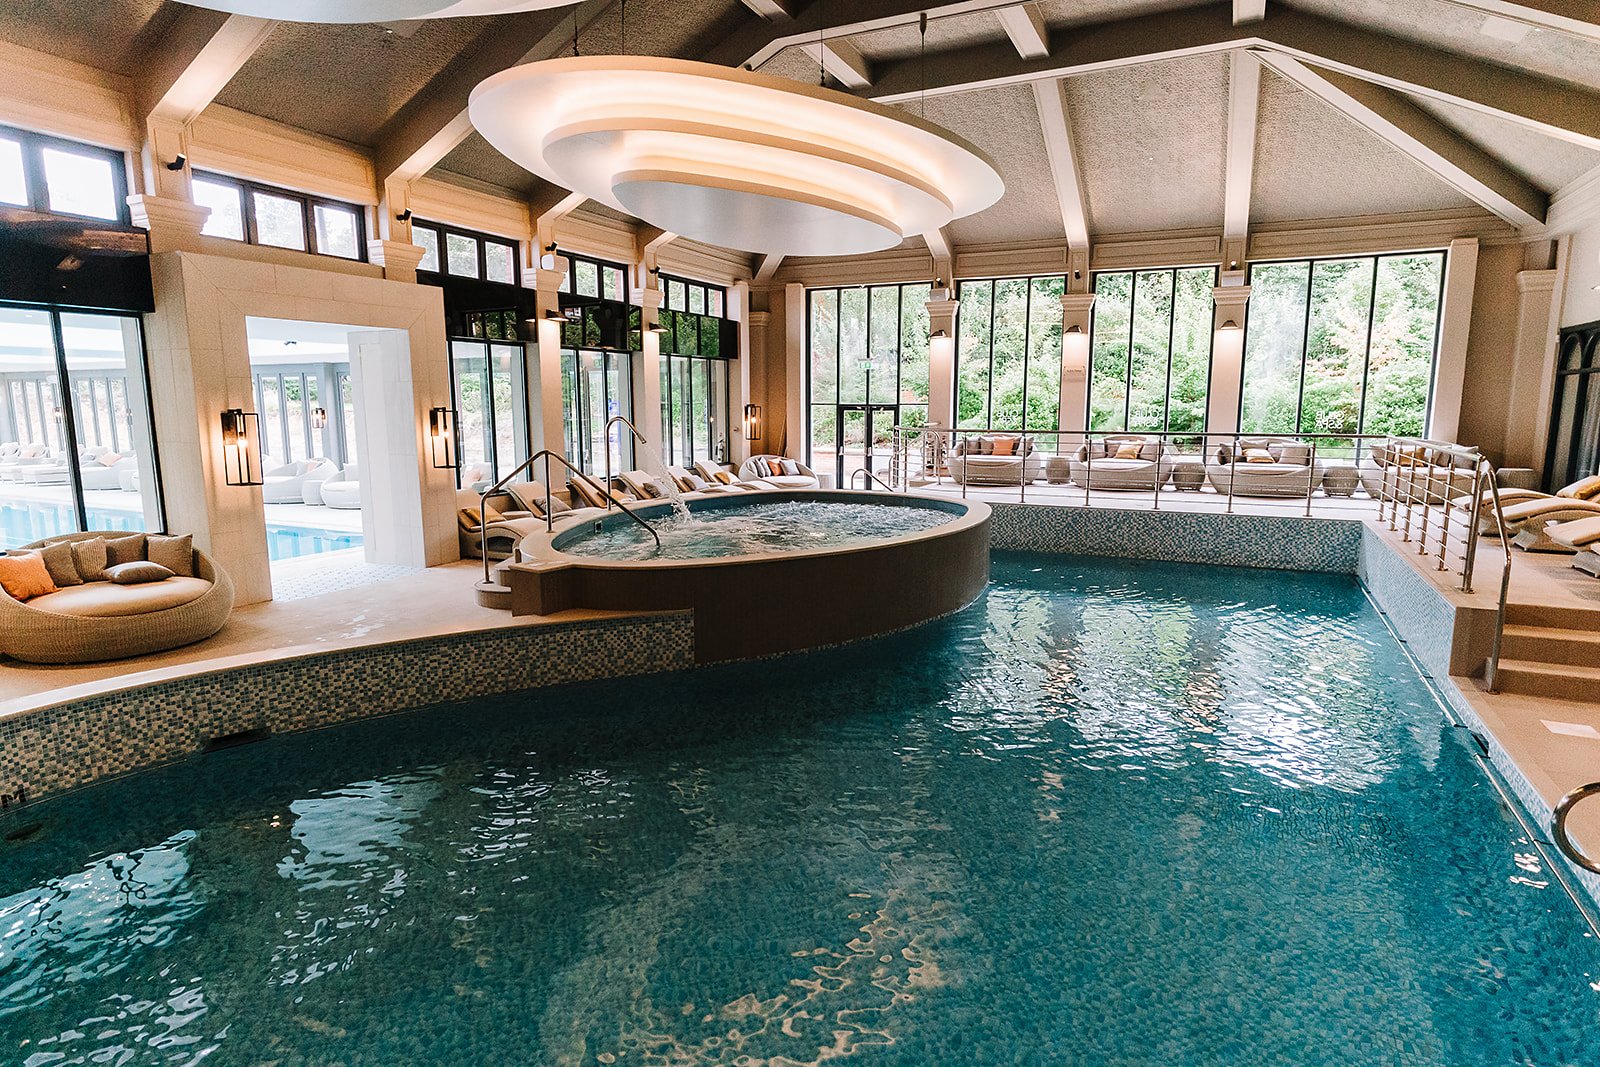 Treat yourself to a much-needed break at Champneys’ new £10m luxury spa at Mottram Hall